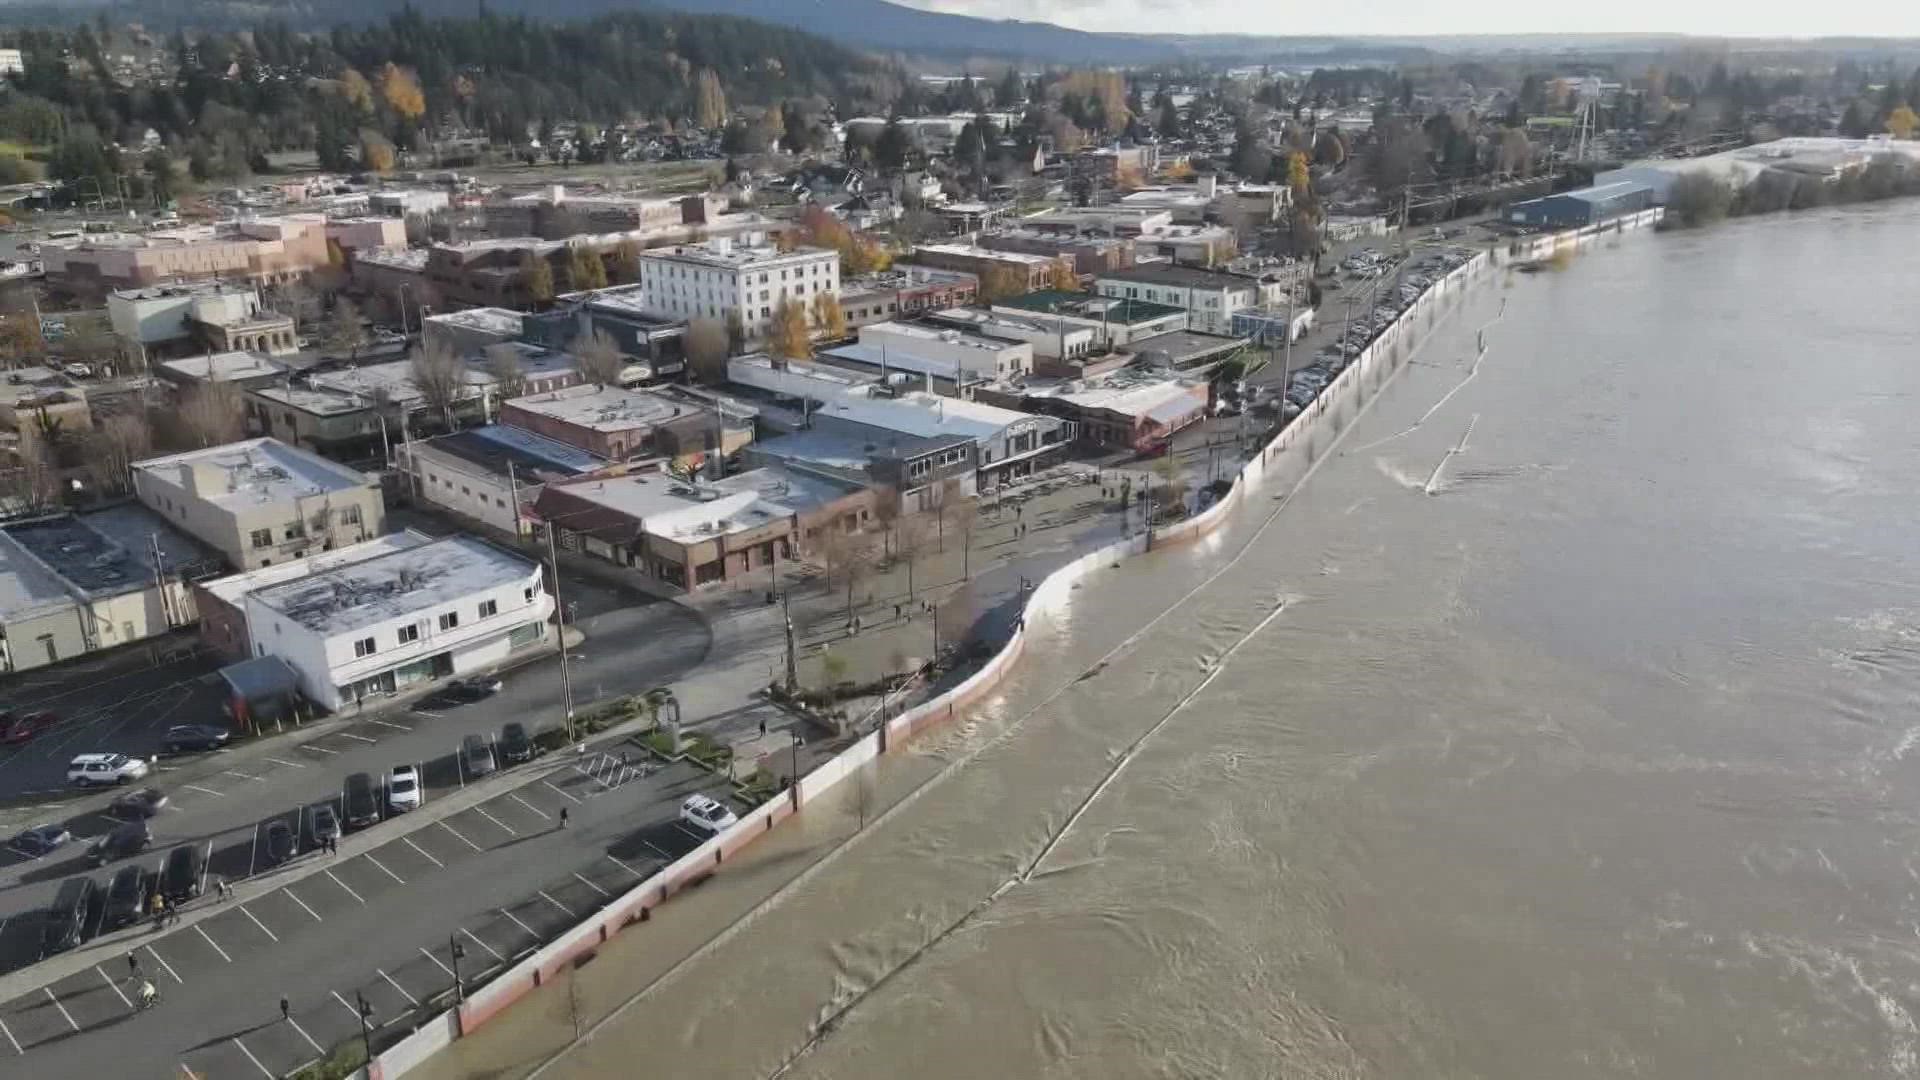 Sen. Patty Murray is set to visit the Skagit County floodwall that held in Mount Vernon amid historic flooding.